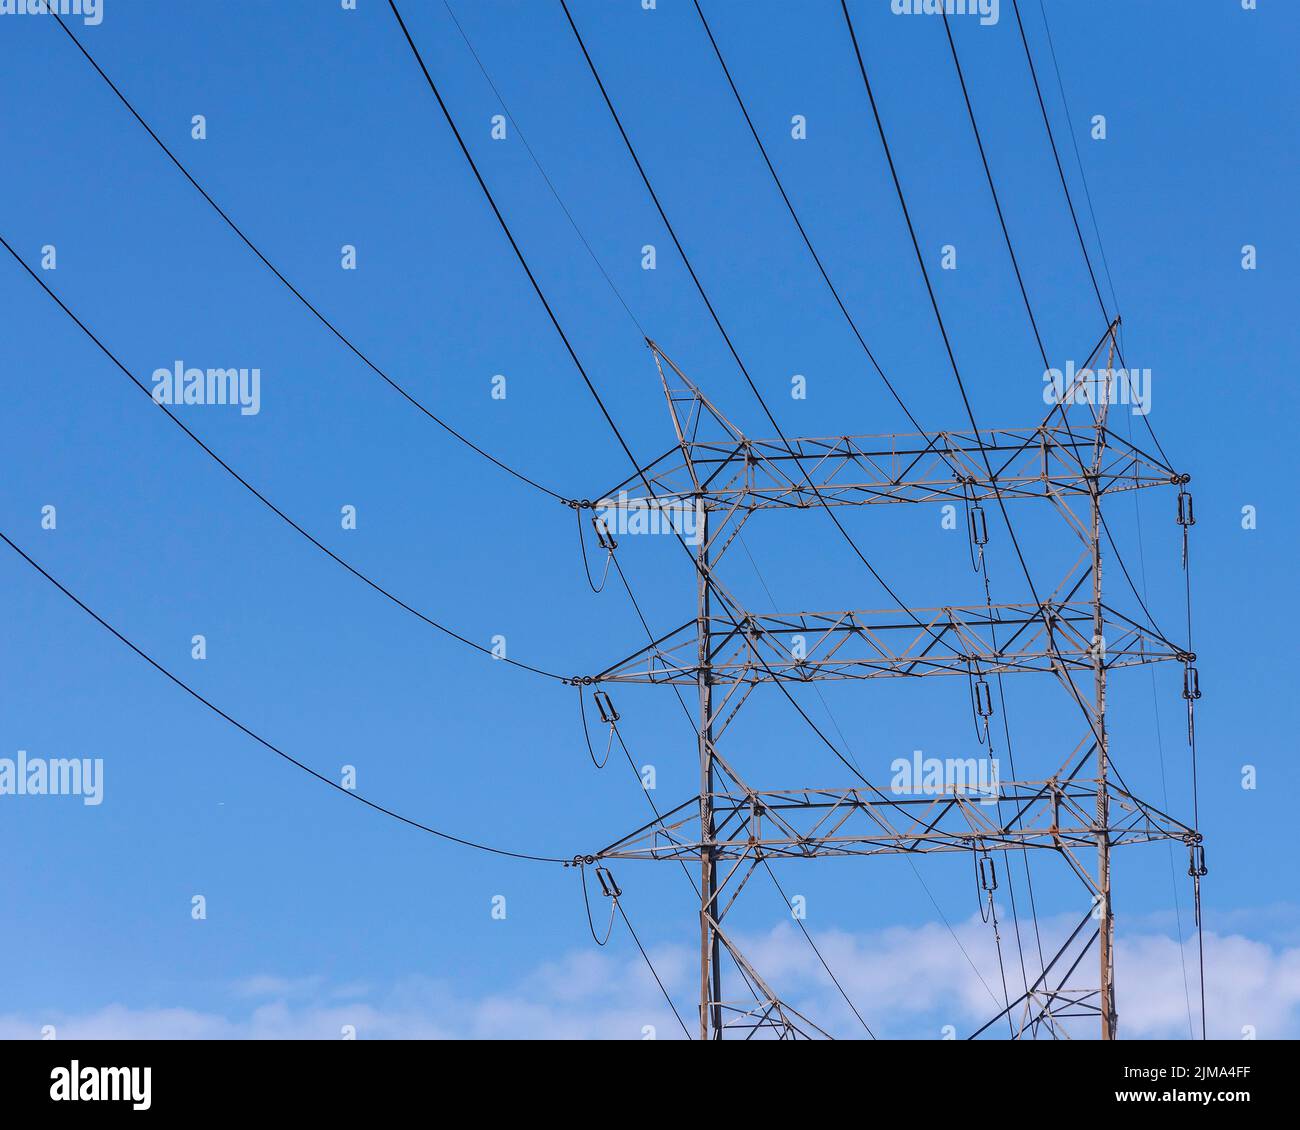 A steel lattice transmission tower stands against a clear blue sky. Stock Photo